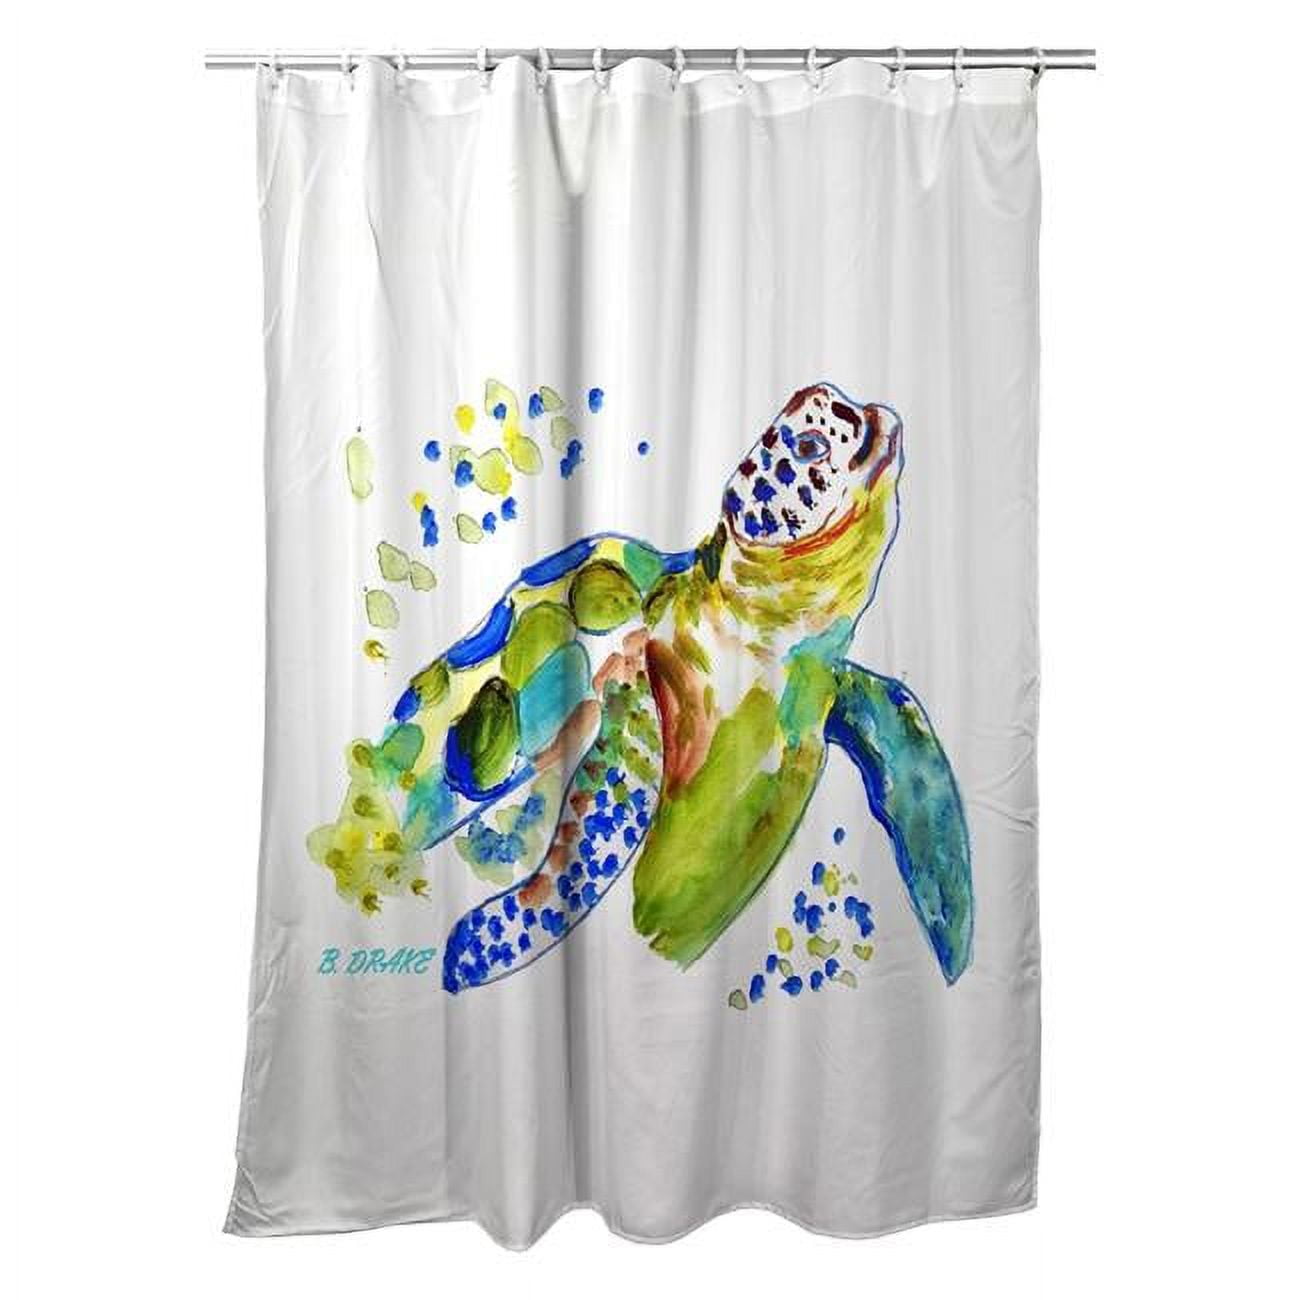 Picture of Betsydrake SH1170 71 x 74 in. Baby Sea Turtle Shower Curtain